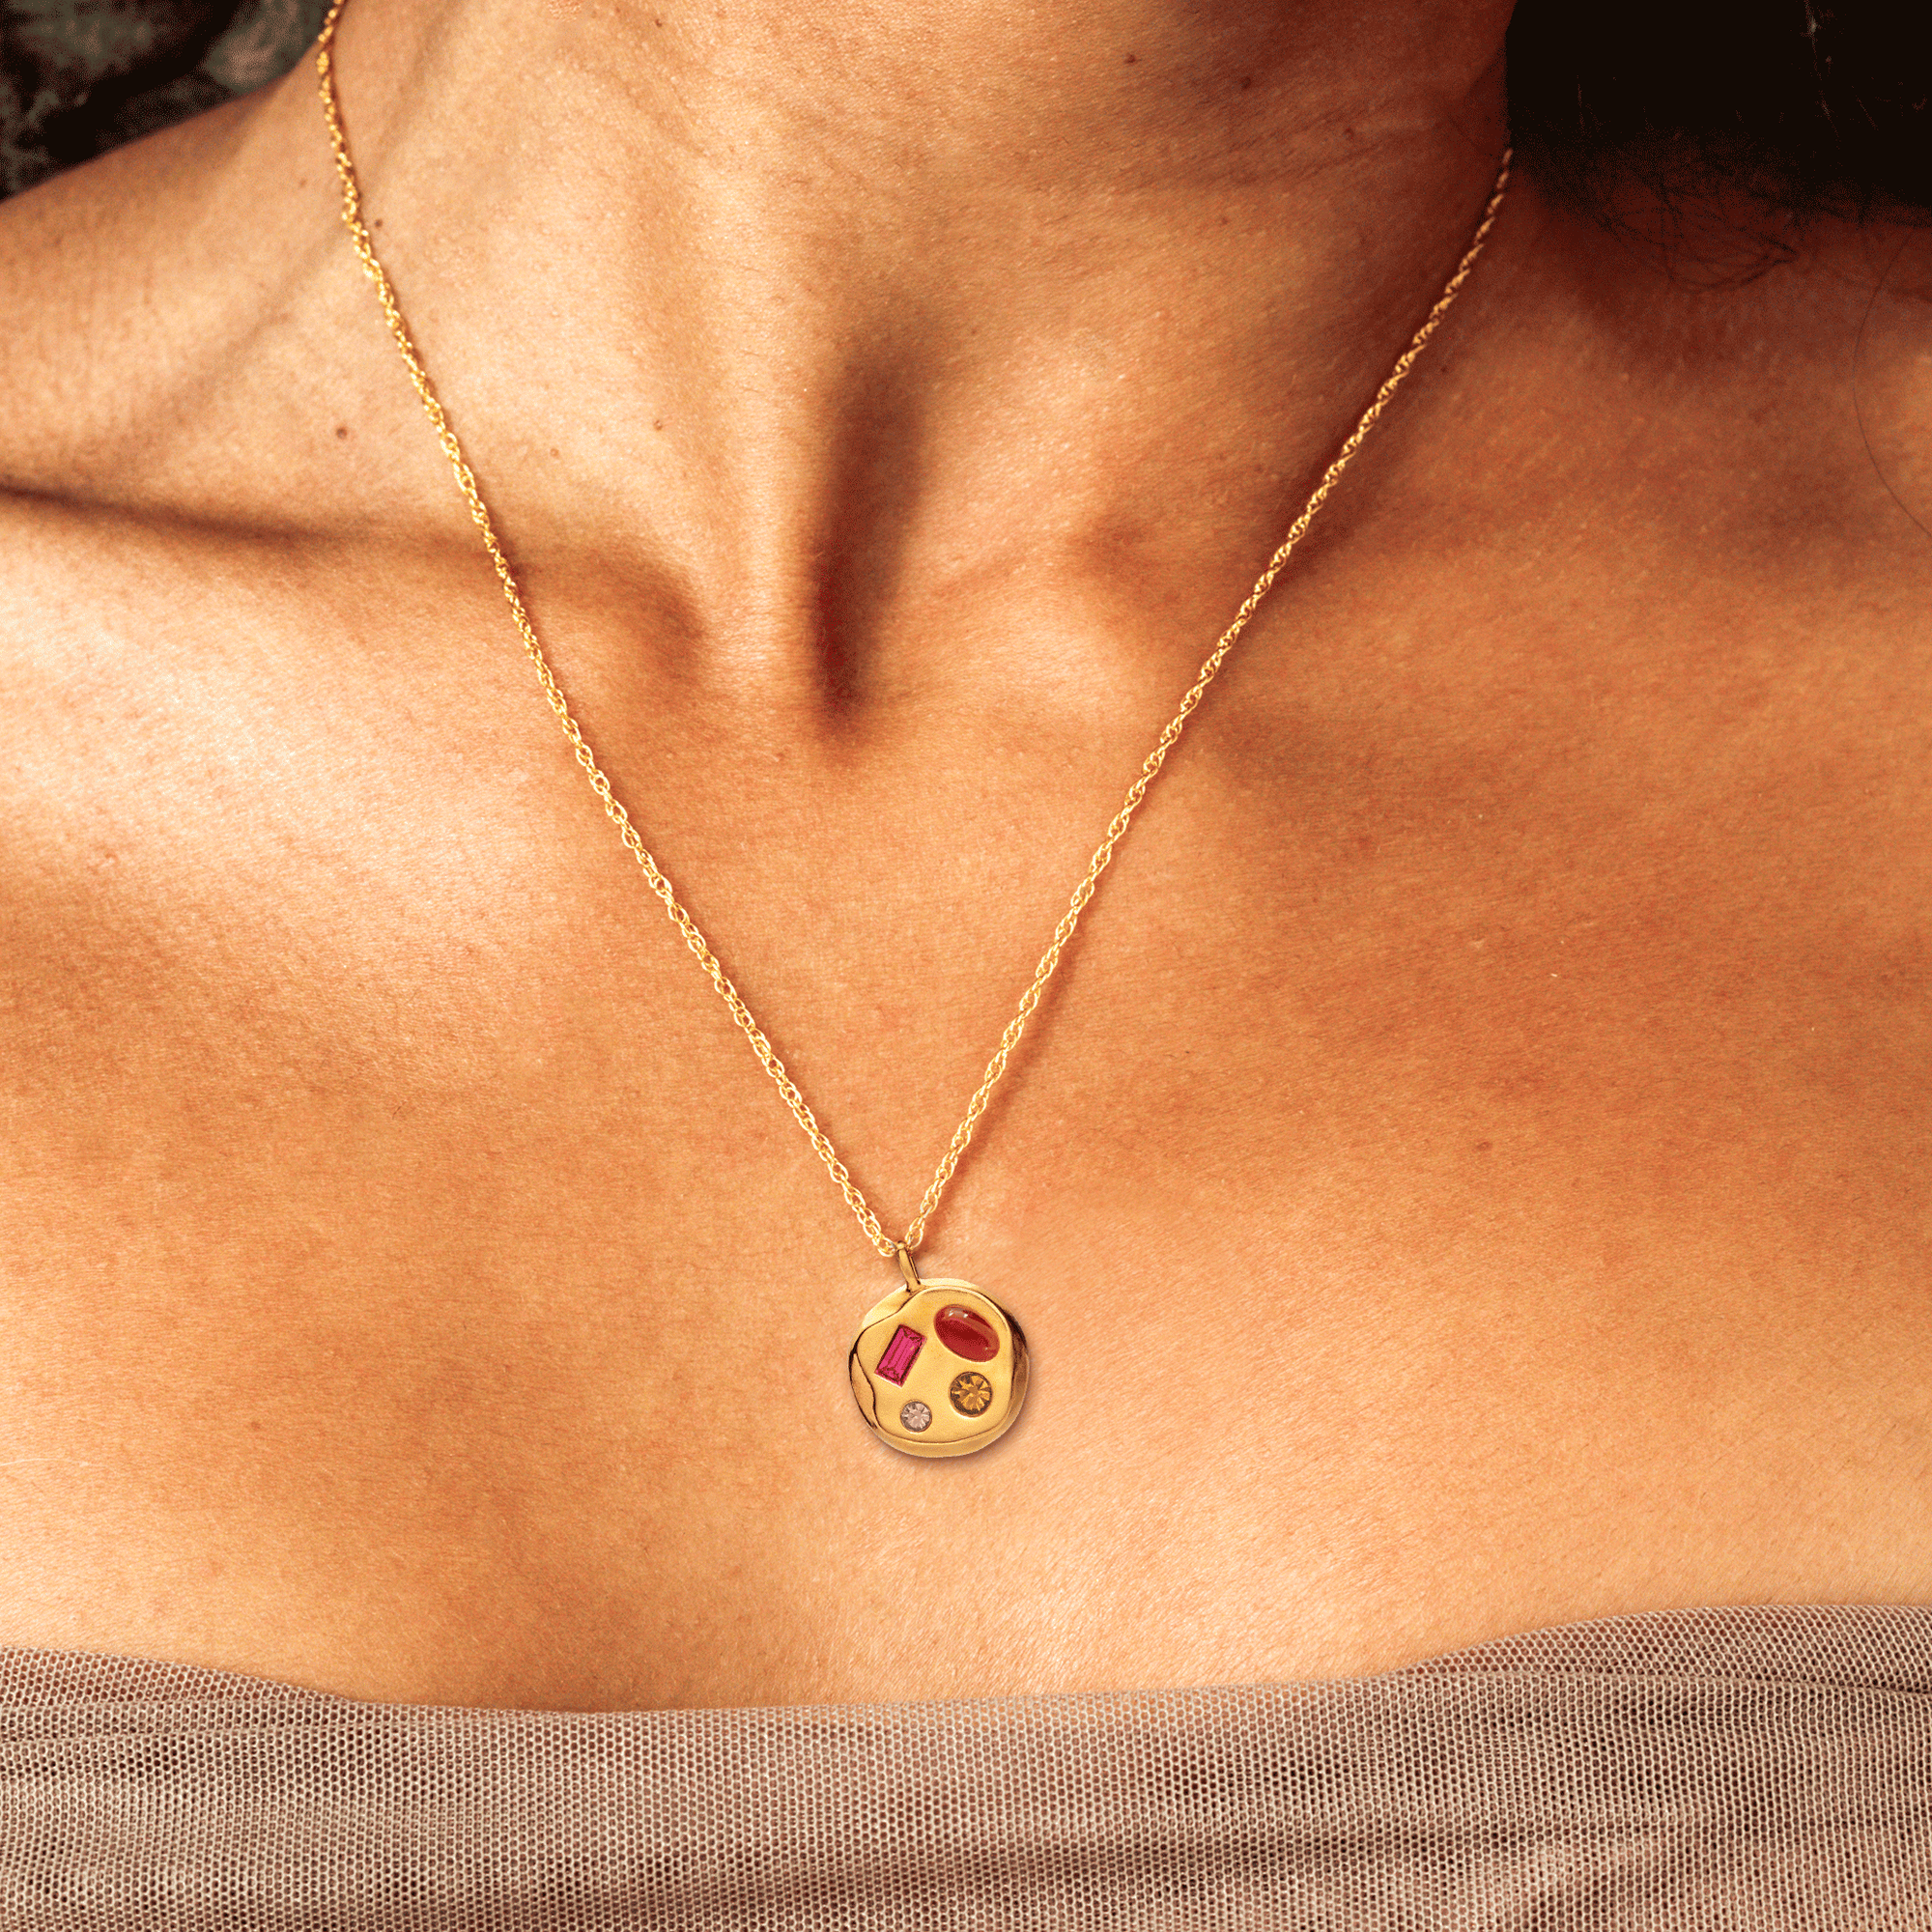 Person wearing The July Sixteenth Pendant